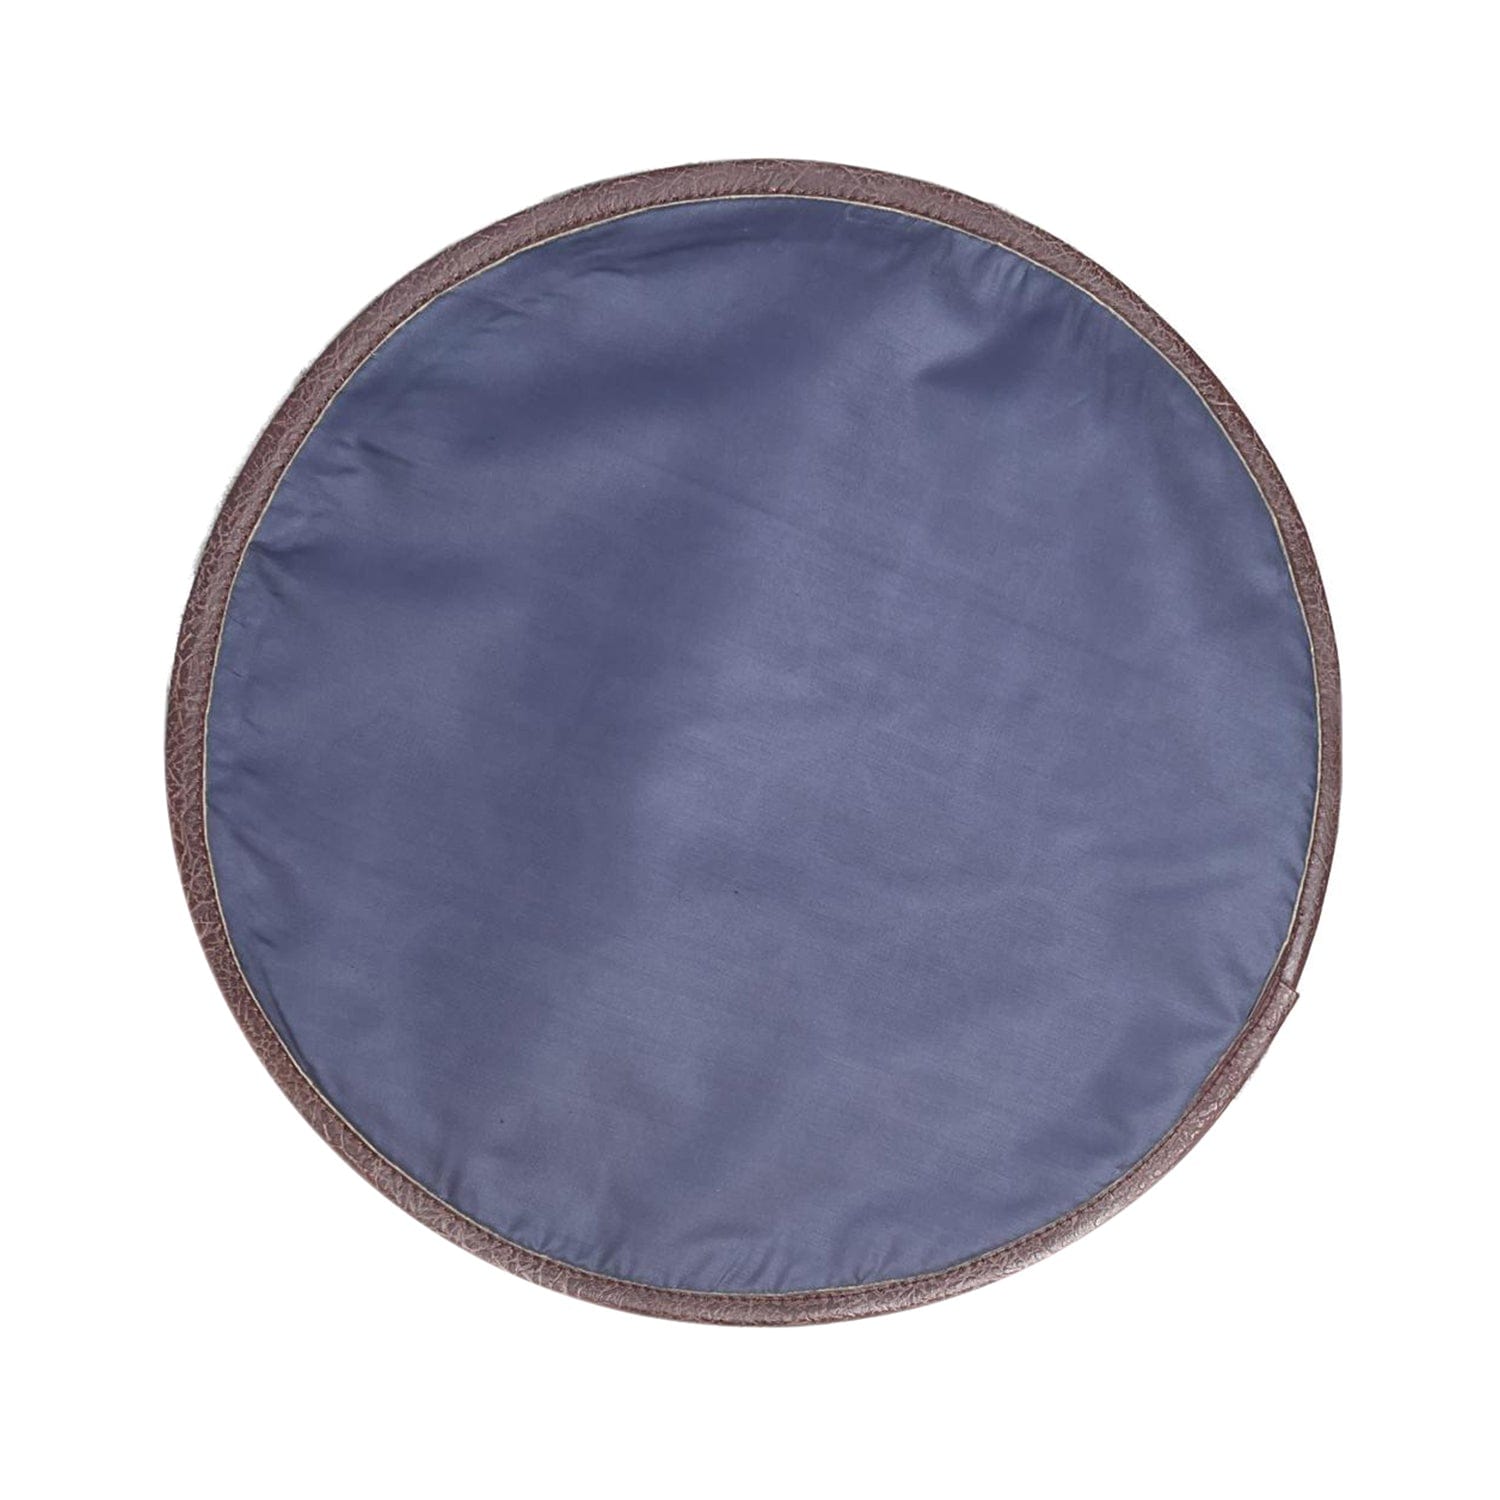 Mona-B Placemat Mona B Set of 2 Printed Placemats, 13 INCH Round, Best for Bed-Side Table/Center Table, Dining Table/Shelves - PP-114